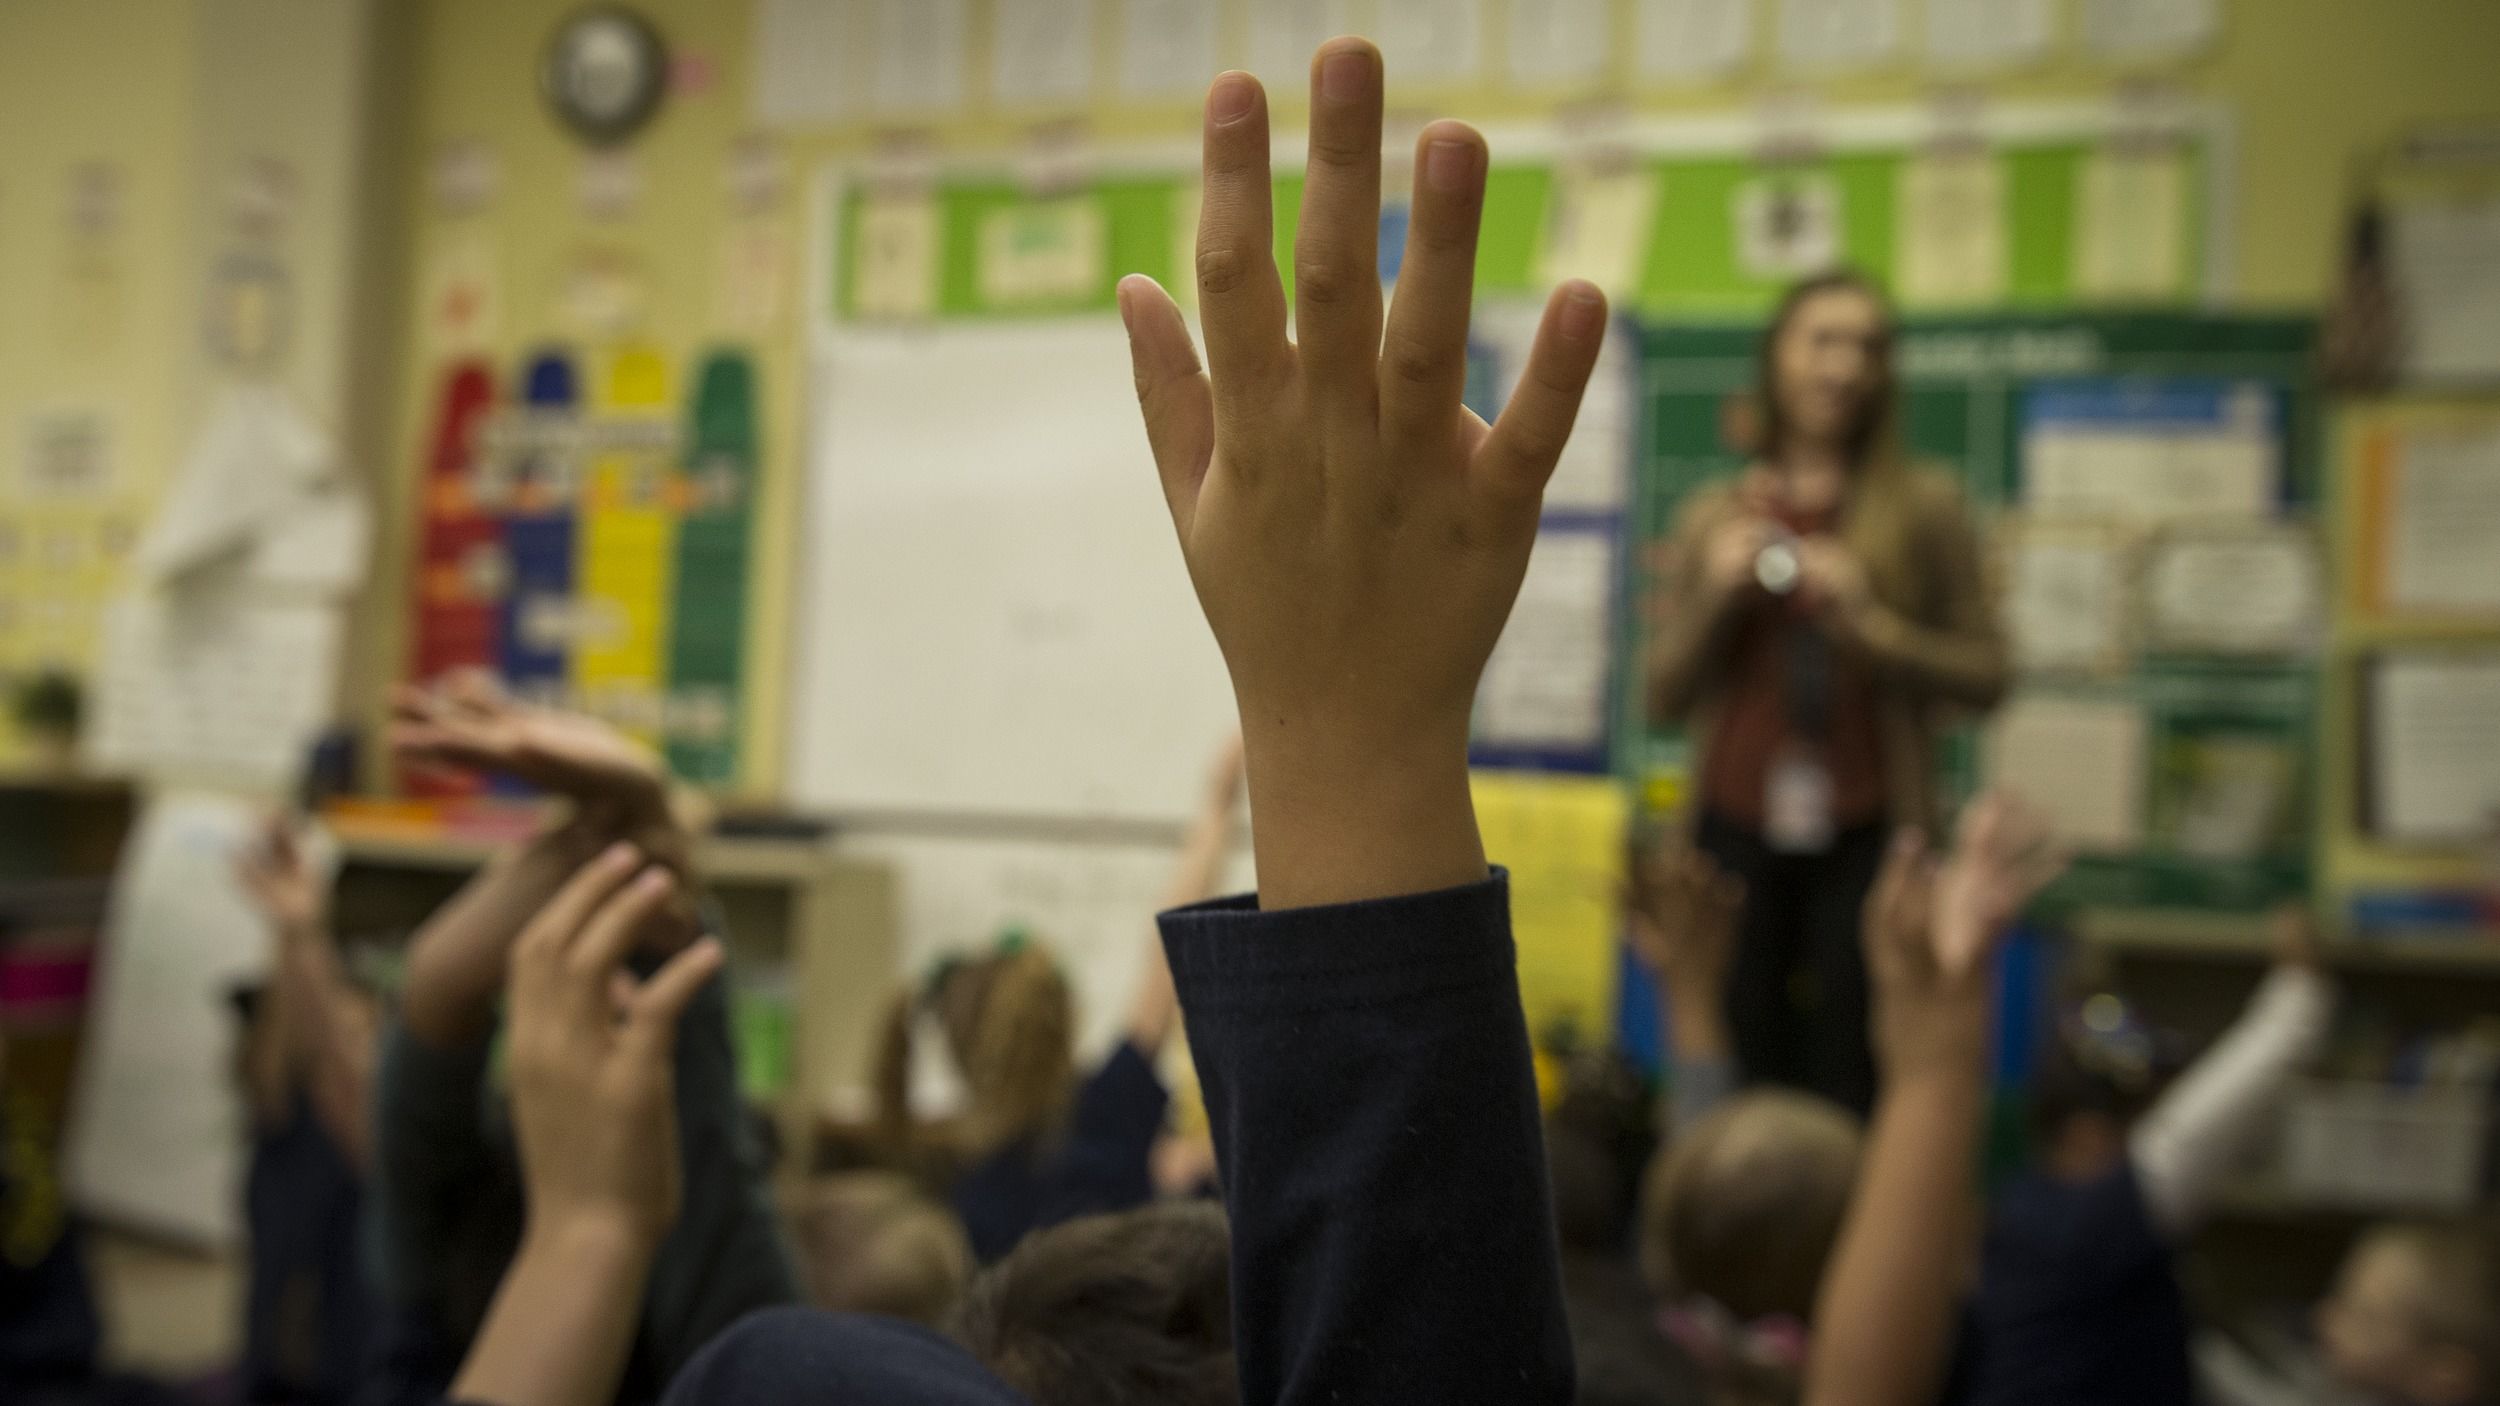 A close-up of a student's hand raised in an elementary classroom.